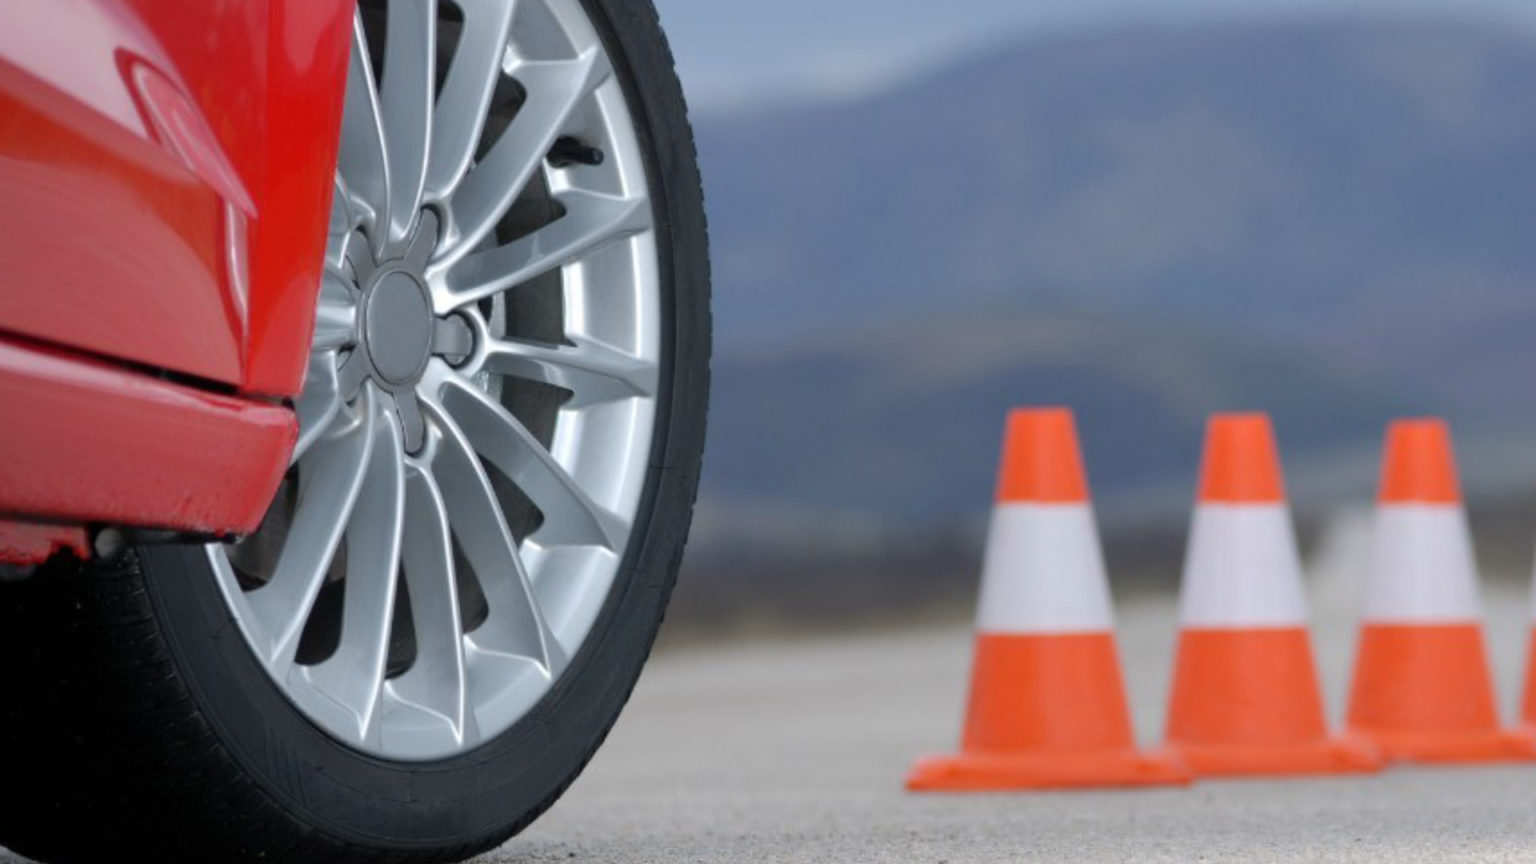 defensive-driving-training-course-tuvsw-academy